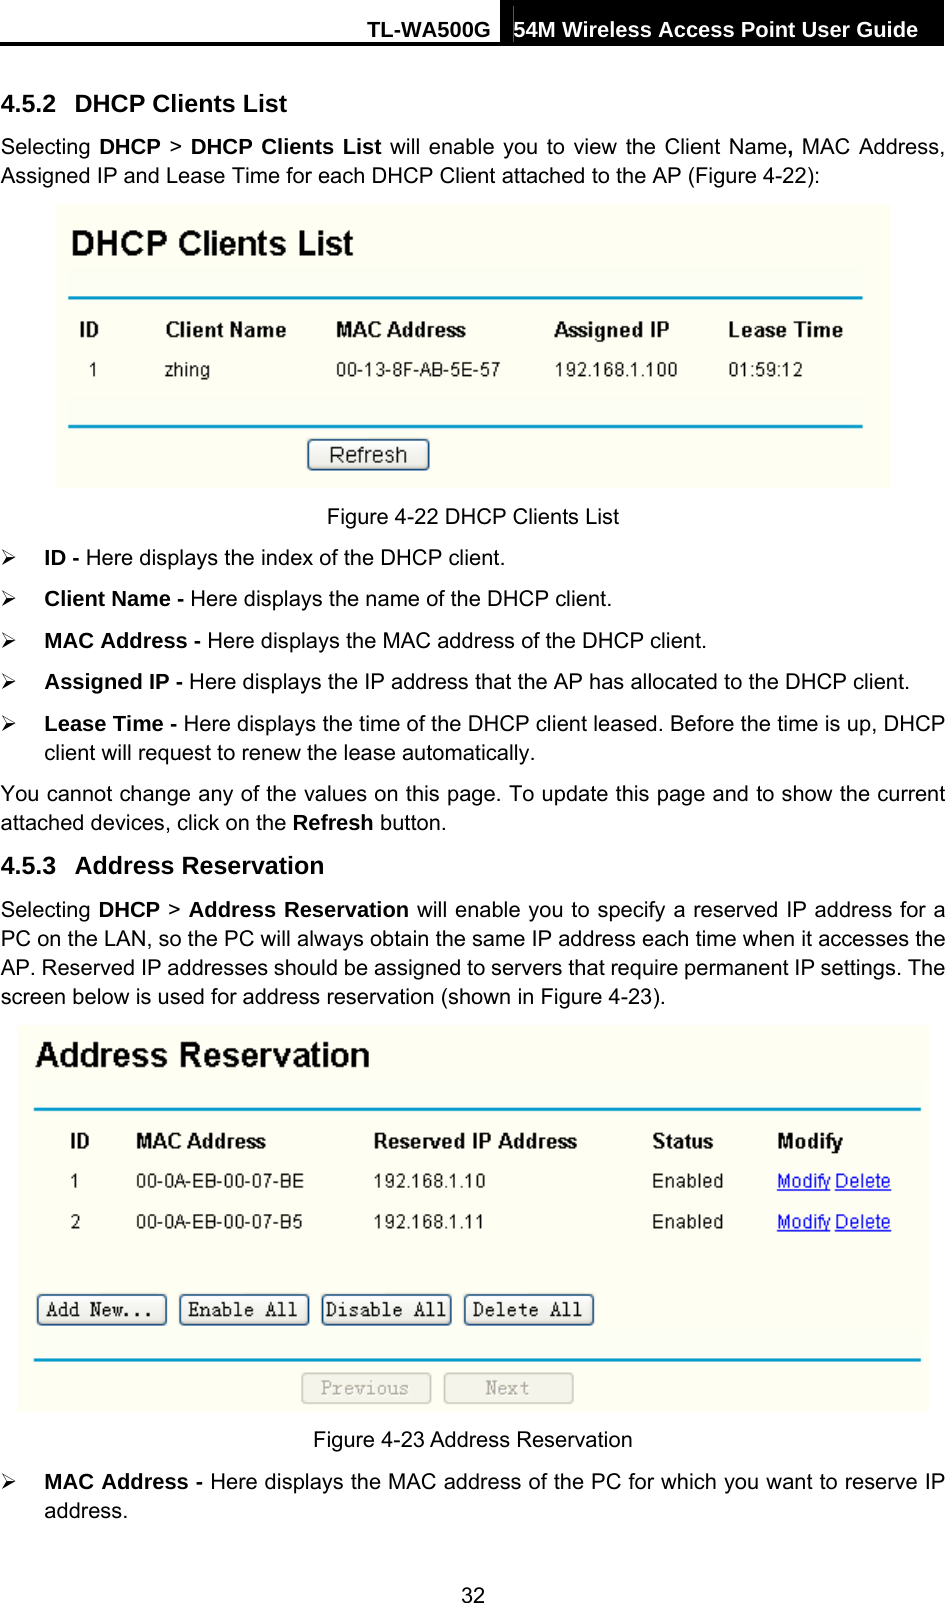 TL-WA500G 54M Wireless Access Point User Guide  4.5.2  DHCP Clients List Selecting DHCP &gt; DHCP Clients List will enable you to view the Client Name, MAC Address, Assigned IP and Lease Time for each DHCP Client attached to the AP (Figure 4-22):  Figure 4-22 DHCP Clients List ¾ ID - Here displays the index of the DHCP client. ¾ Client Name - Here displays the name of the DHCP client. ¾ MAC Address - Here displays the MAC address of the DHCP client. ¾ Assigned IP - Here displays the IP address that the AP has allocated to the DHCP client. ¾ Lease Time - Here displays the time of the DHCP client leased. Before the time is up, DHCP client will request to renew the lease automatically. You cannot change any of the values on this page. To update this page and to show the current attached devices, click on the Refresh button. 4.5.3  Address Reservation Selecting DHCP &gt; Address Reservation will enable you to specify a reserved IP address for a PC on the LAN, so the PC will always obtain the same IP address each time when it accesses the AP. Reserved IP addresses should be assigned to servers that require permanent IP settings. The screen below is used for address reservation (shown in Figure 4-23).  Figure 4-23 Address Reservation ¾ MAC Address - Here displays the MAC address of the PC for which you want to reserve IP address. 32 